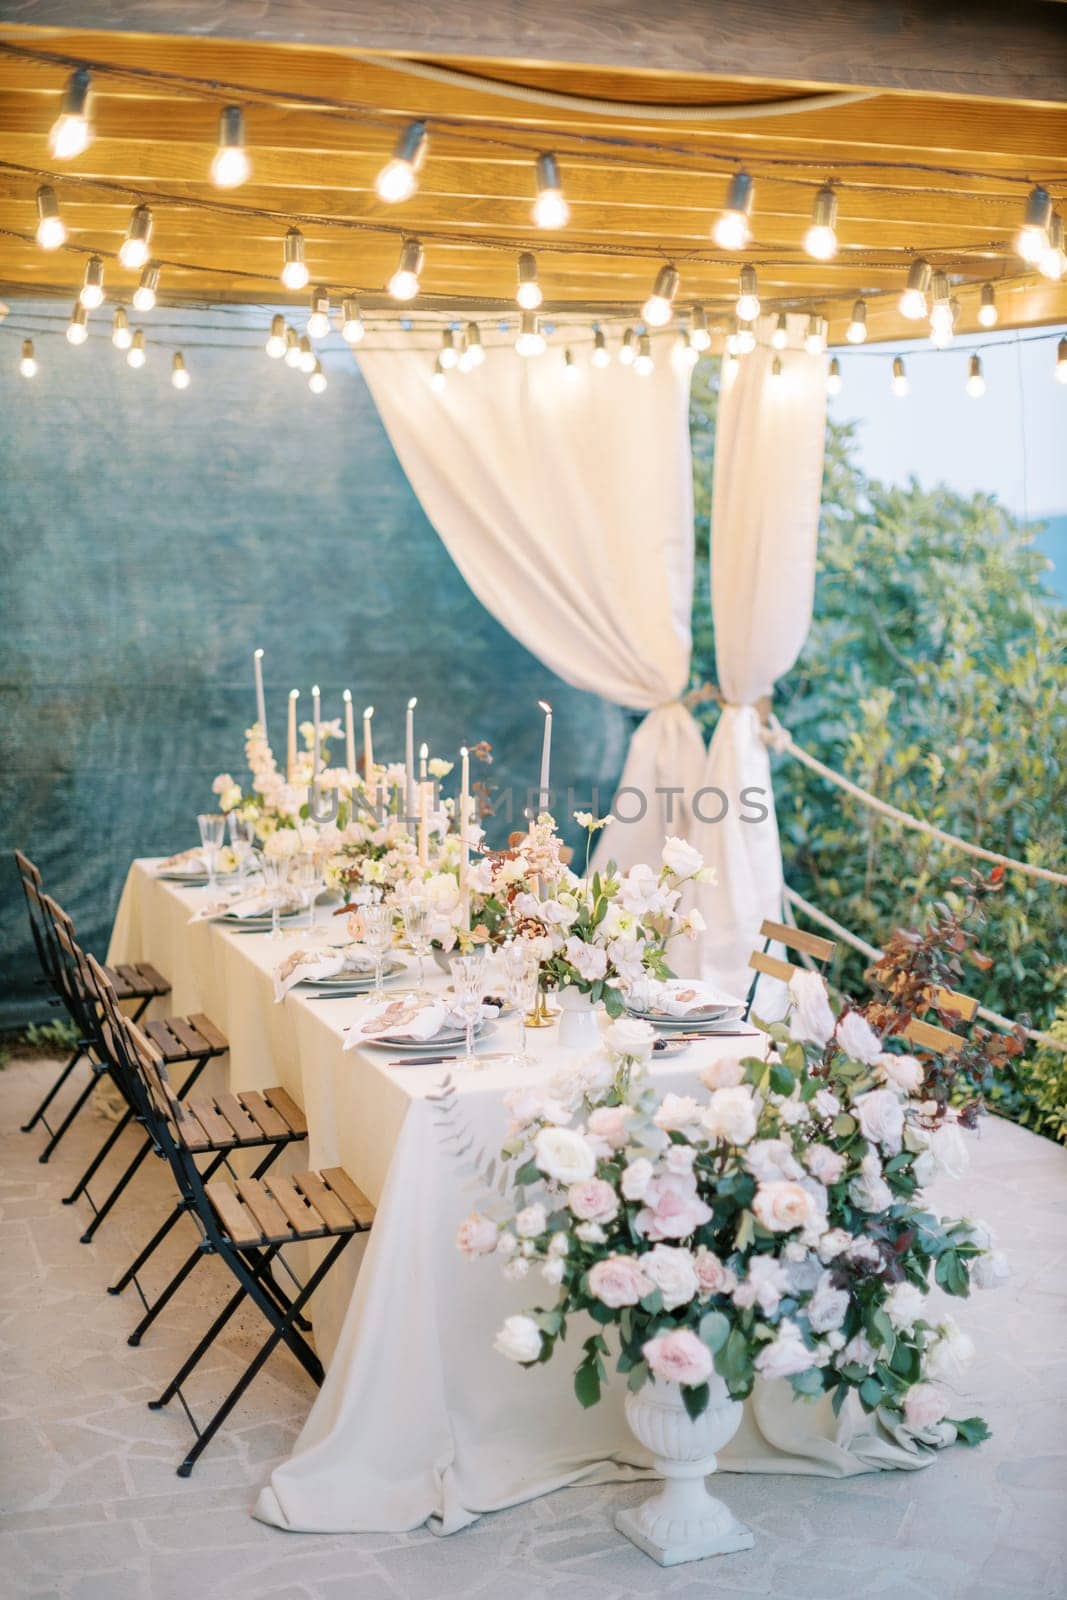 Long set table with bouquets of flowers and lit candles stands on a terrace with curtains by Nadtochiy